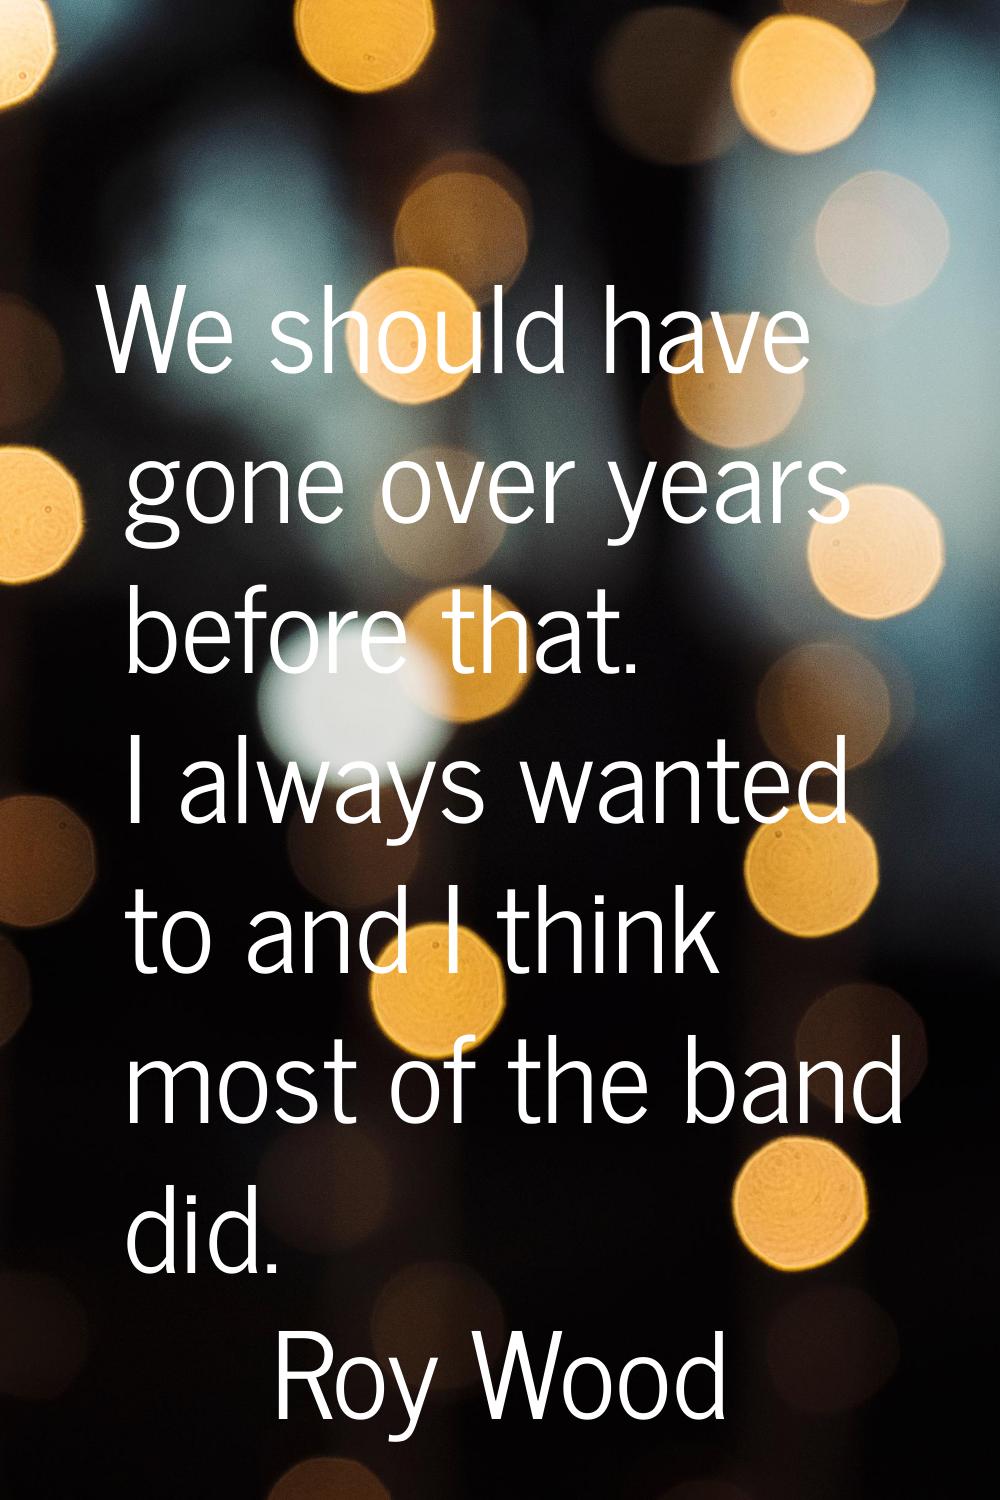 We should have gone over years before that. I always wanted to and I think most of the band did.